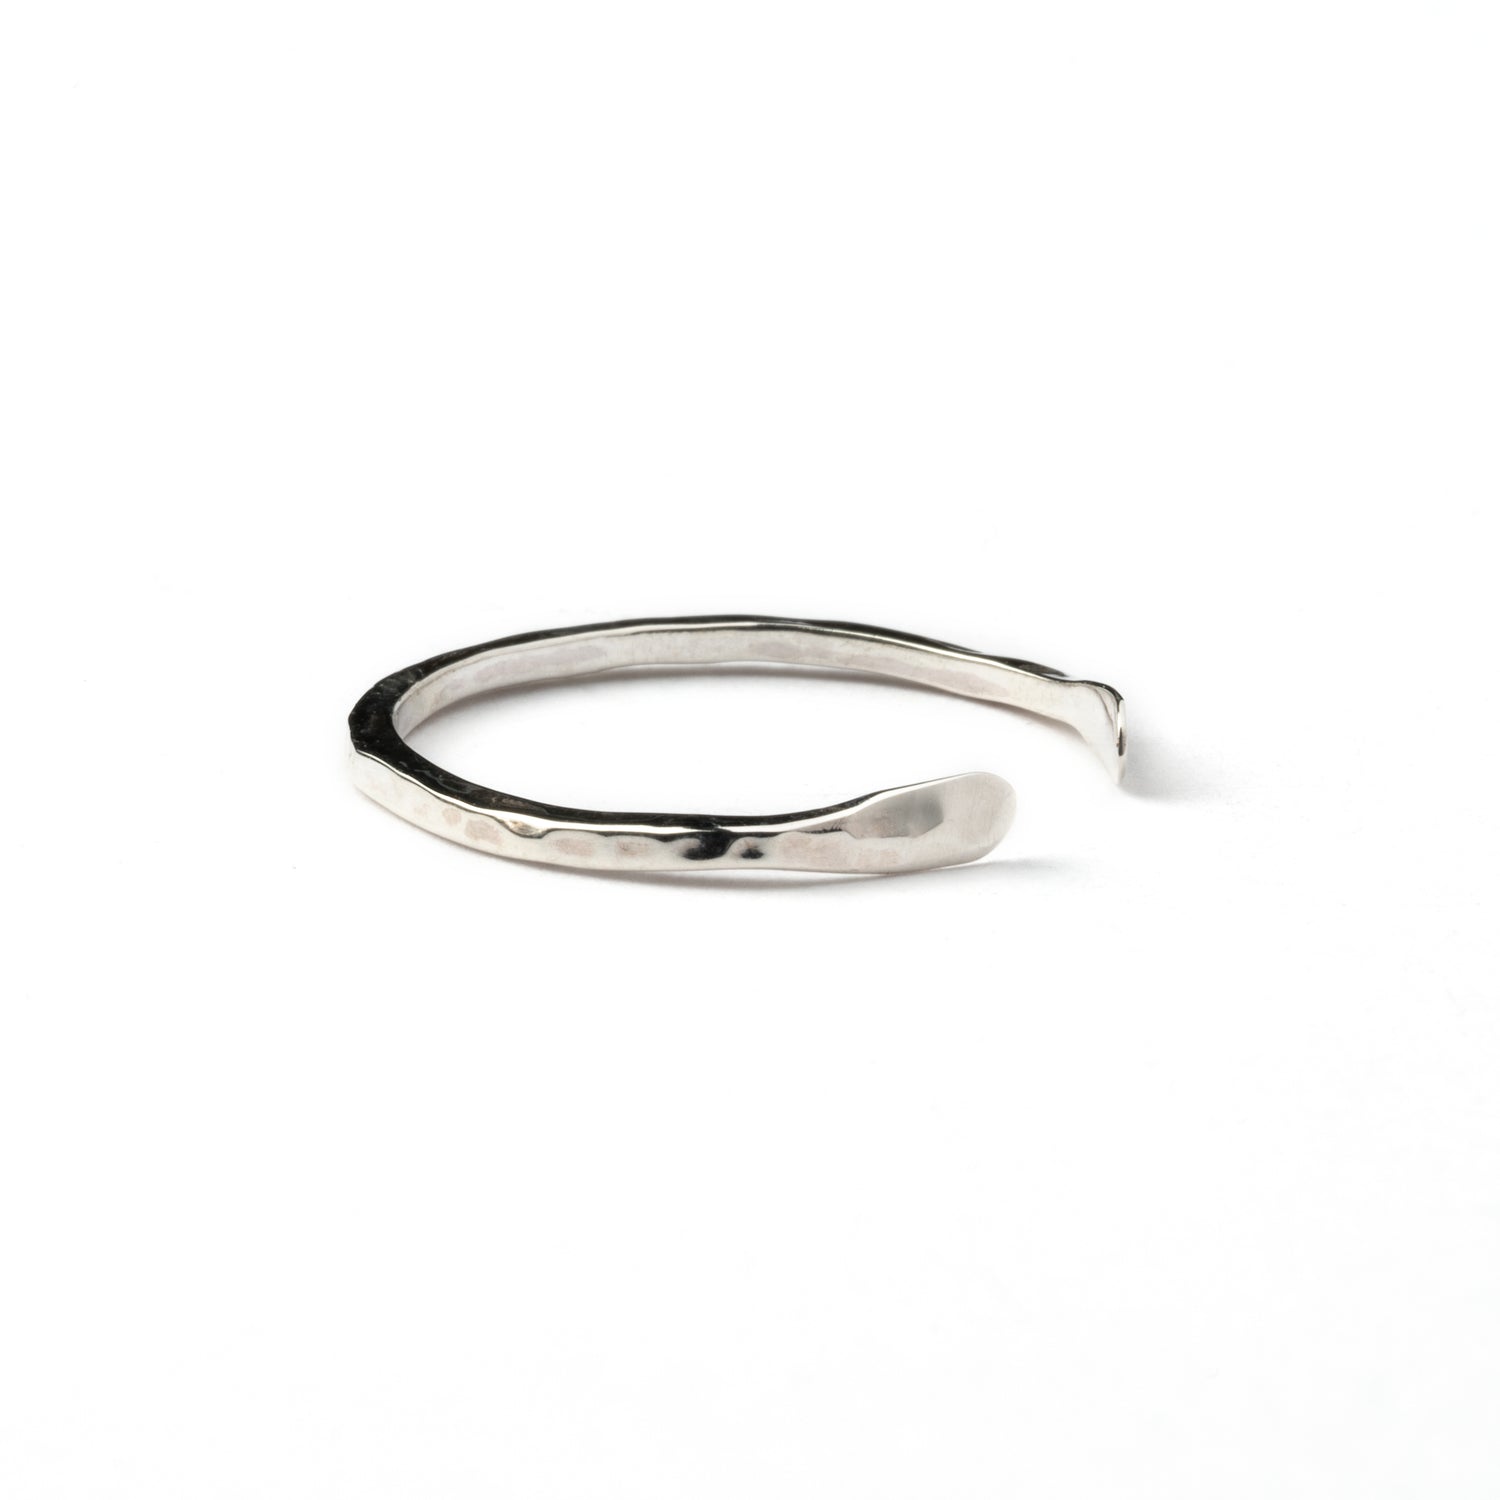 Hammered silver thin adjustable open band ring side view